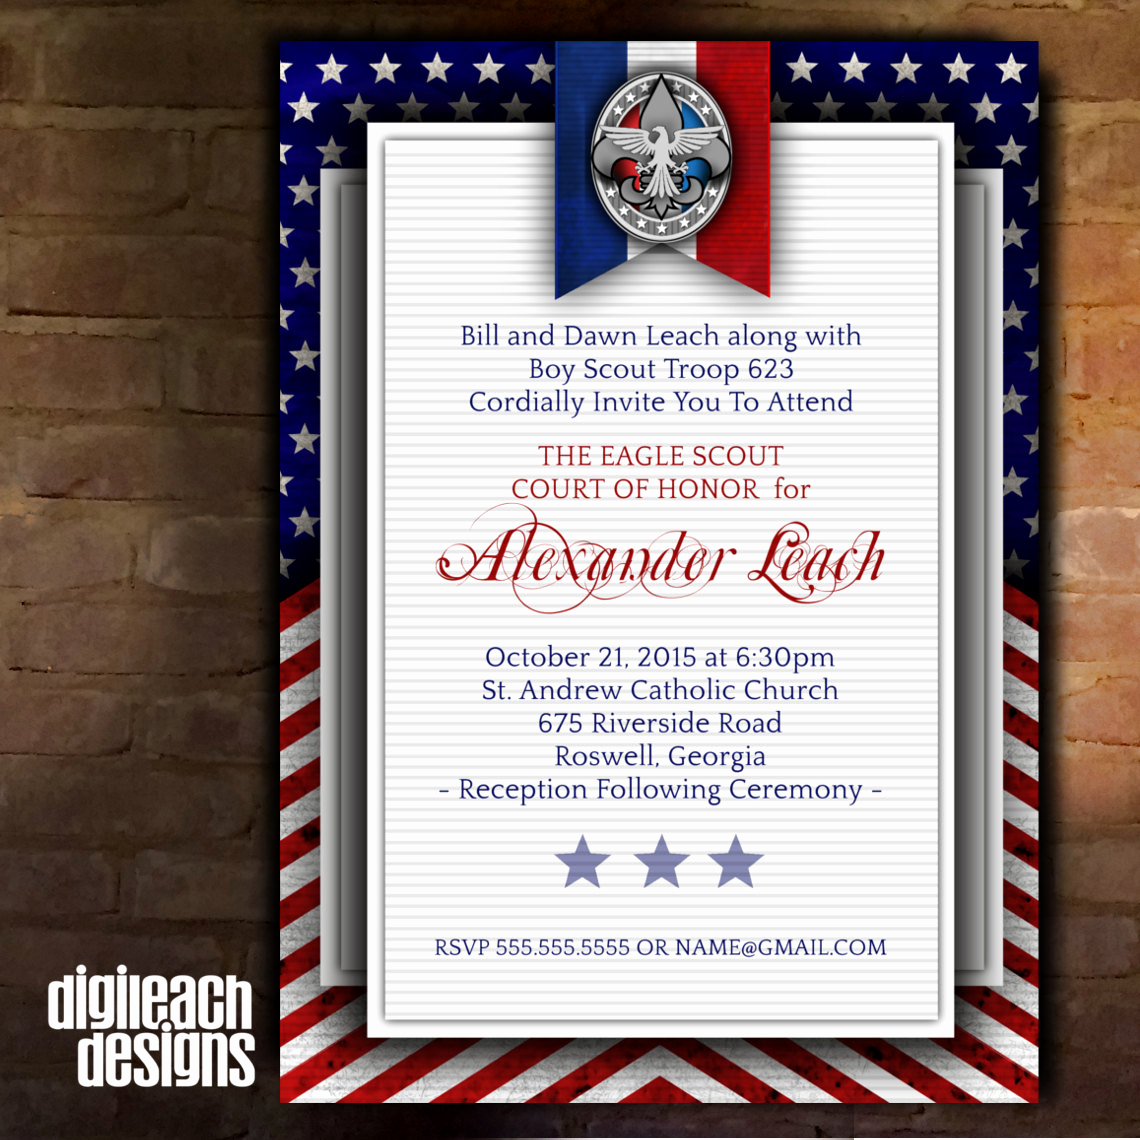 Eagle Scout Invitation Template Best Of Eagle Scout Court Of Honor Invitation by Digileachdesigns